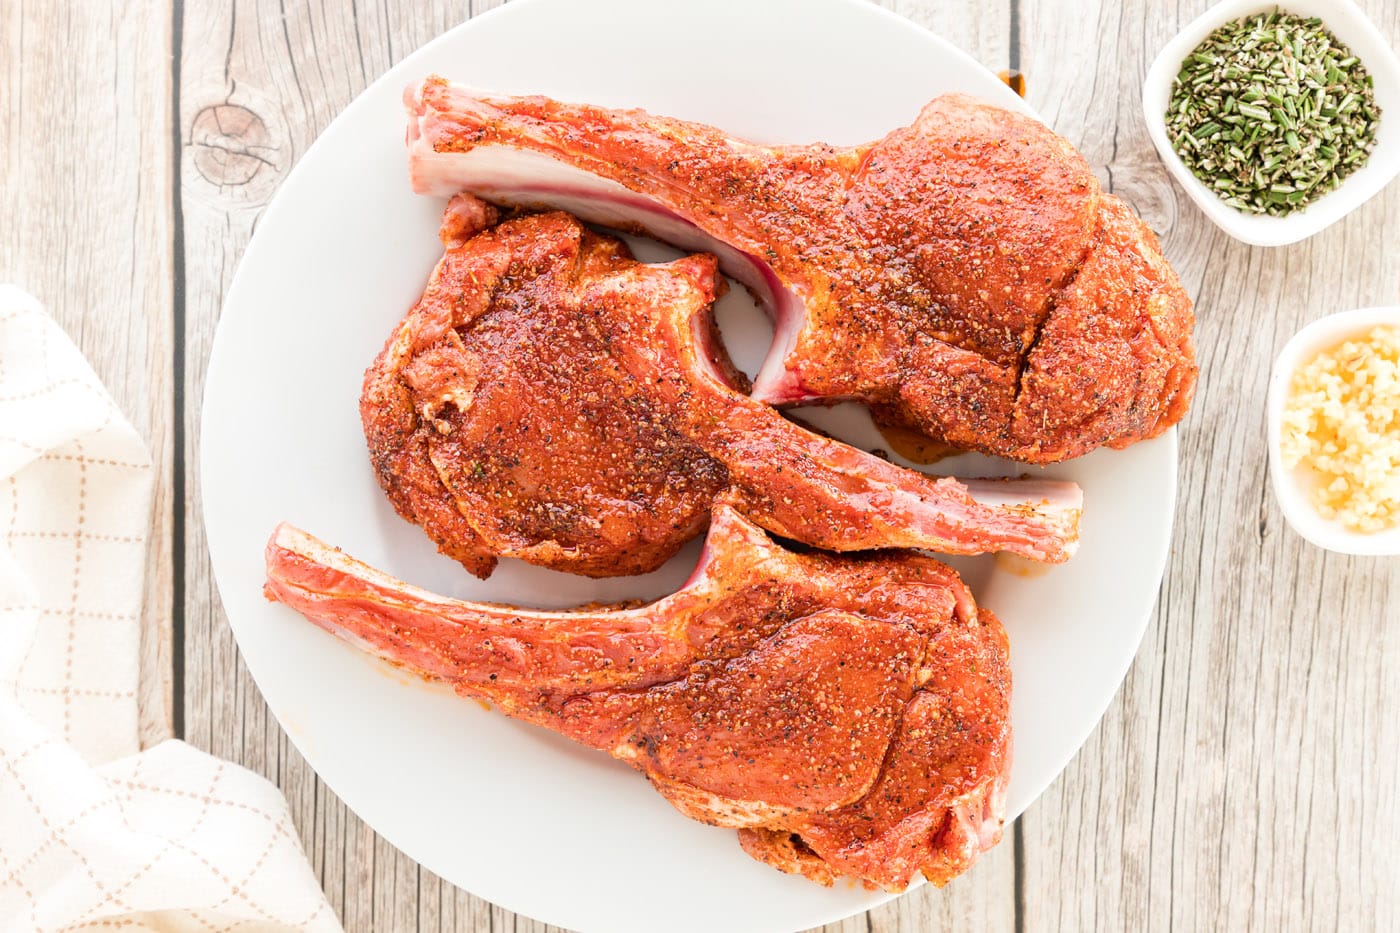 veal chops rubbed with seasonings